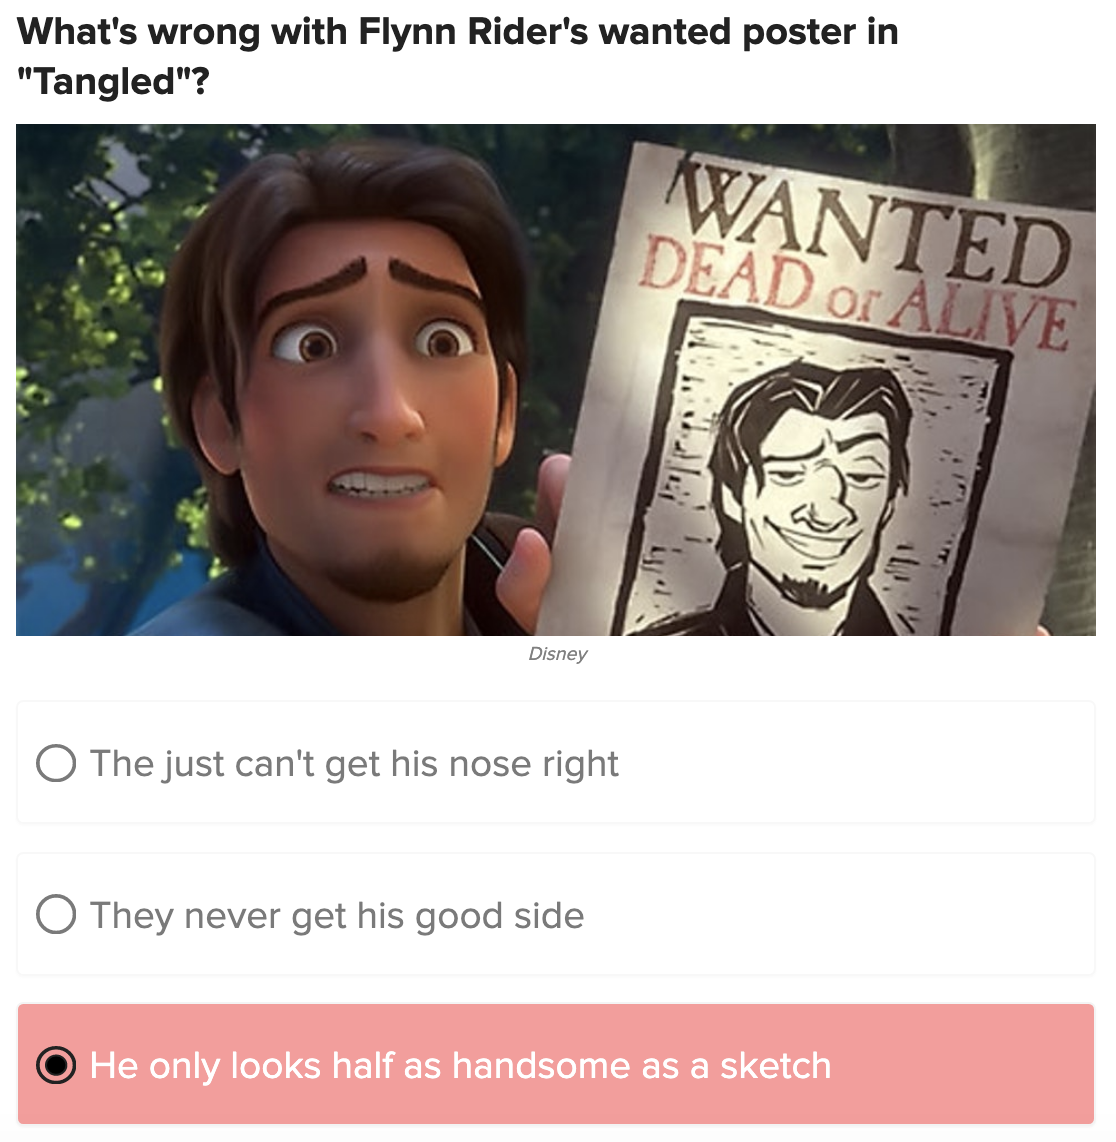 15 Disney BuzzFeed Quizzes With Over A Million Views